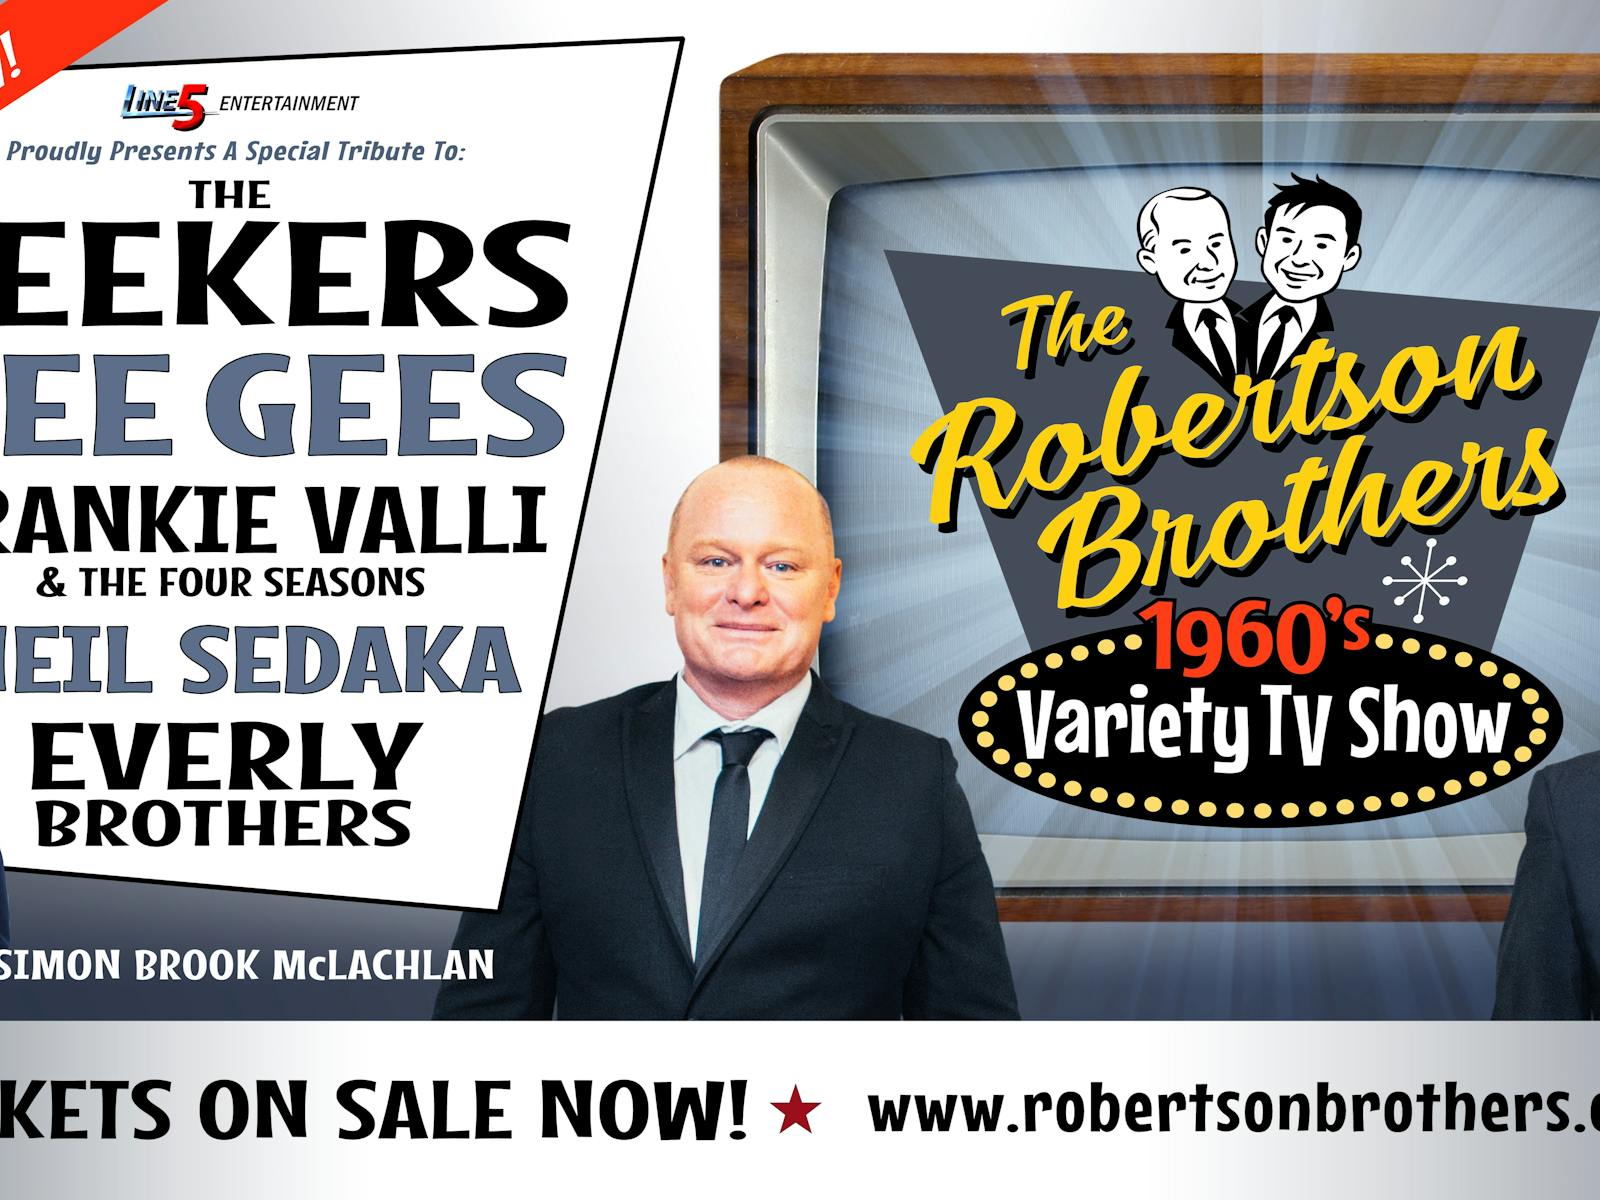 Image for The Robertson Brothers 60's Variety Television Show